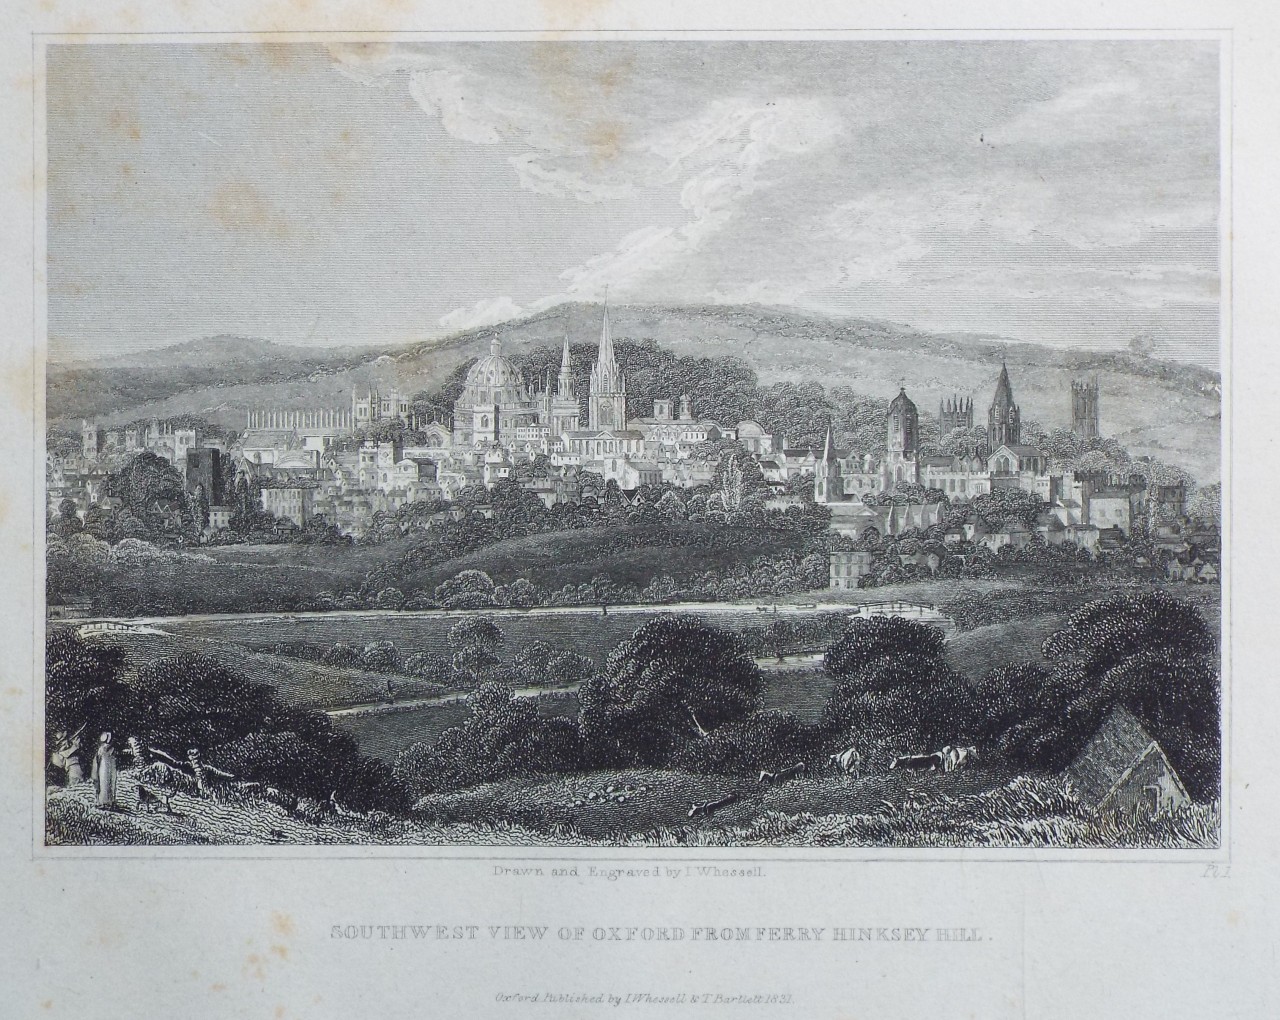 Print - Southwest View of Oxford from Ferry Hinksey Hill. - Whessell